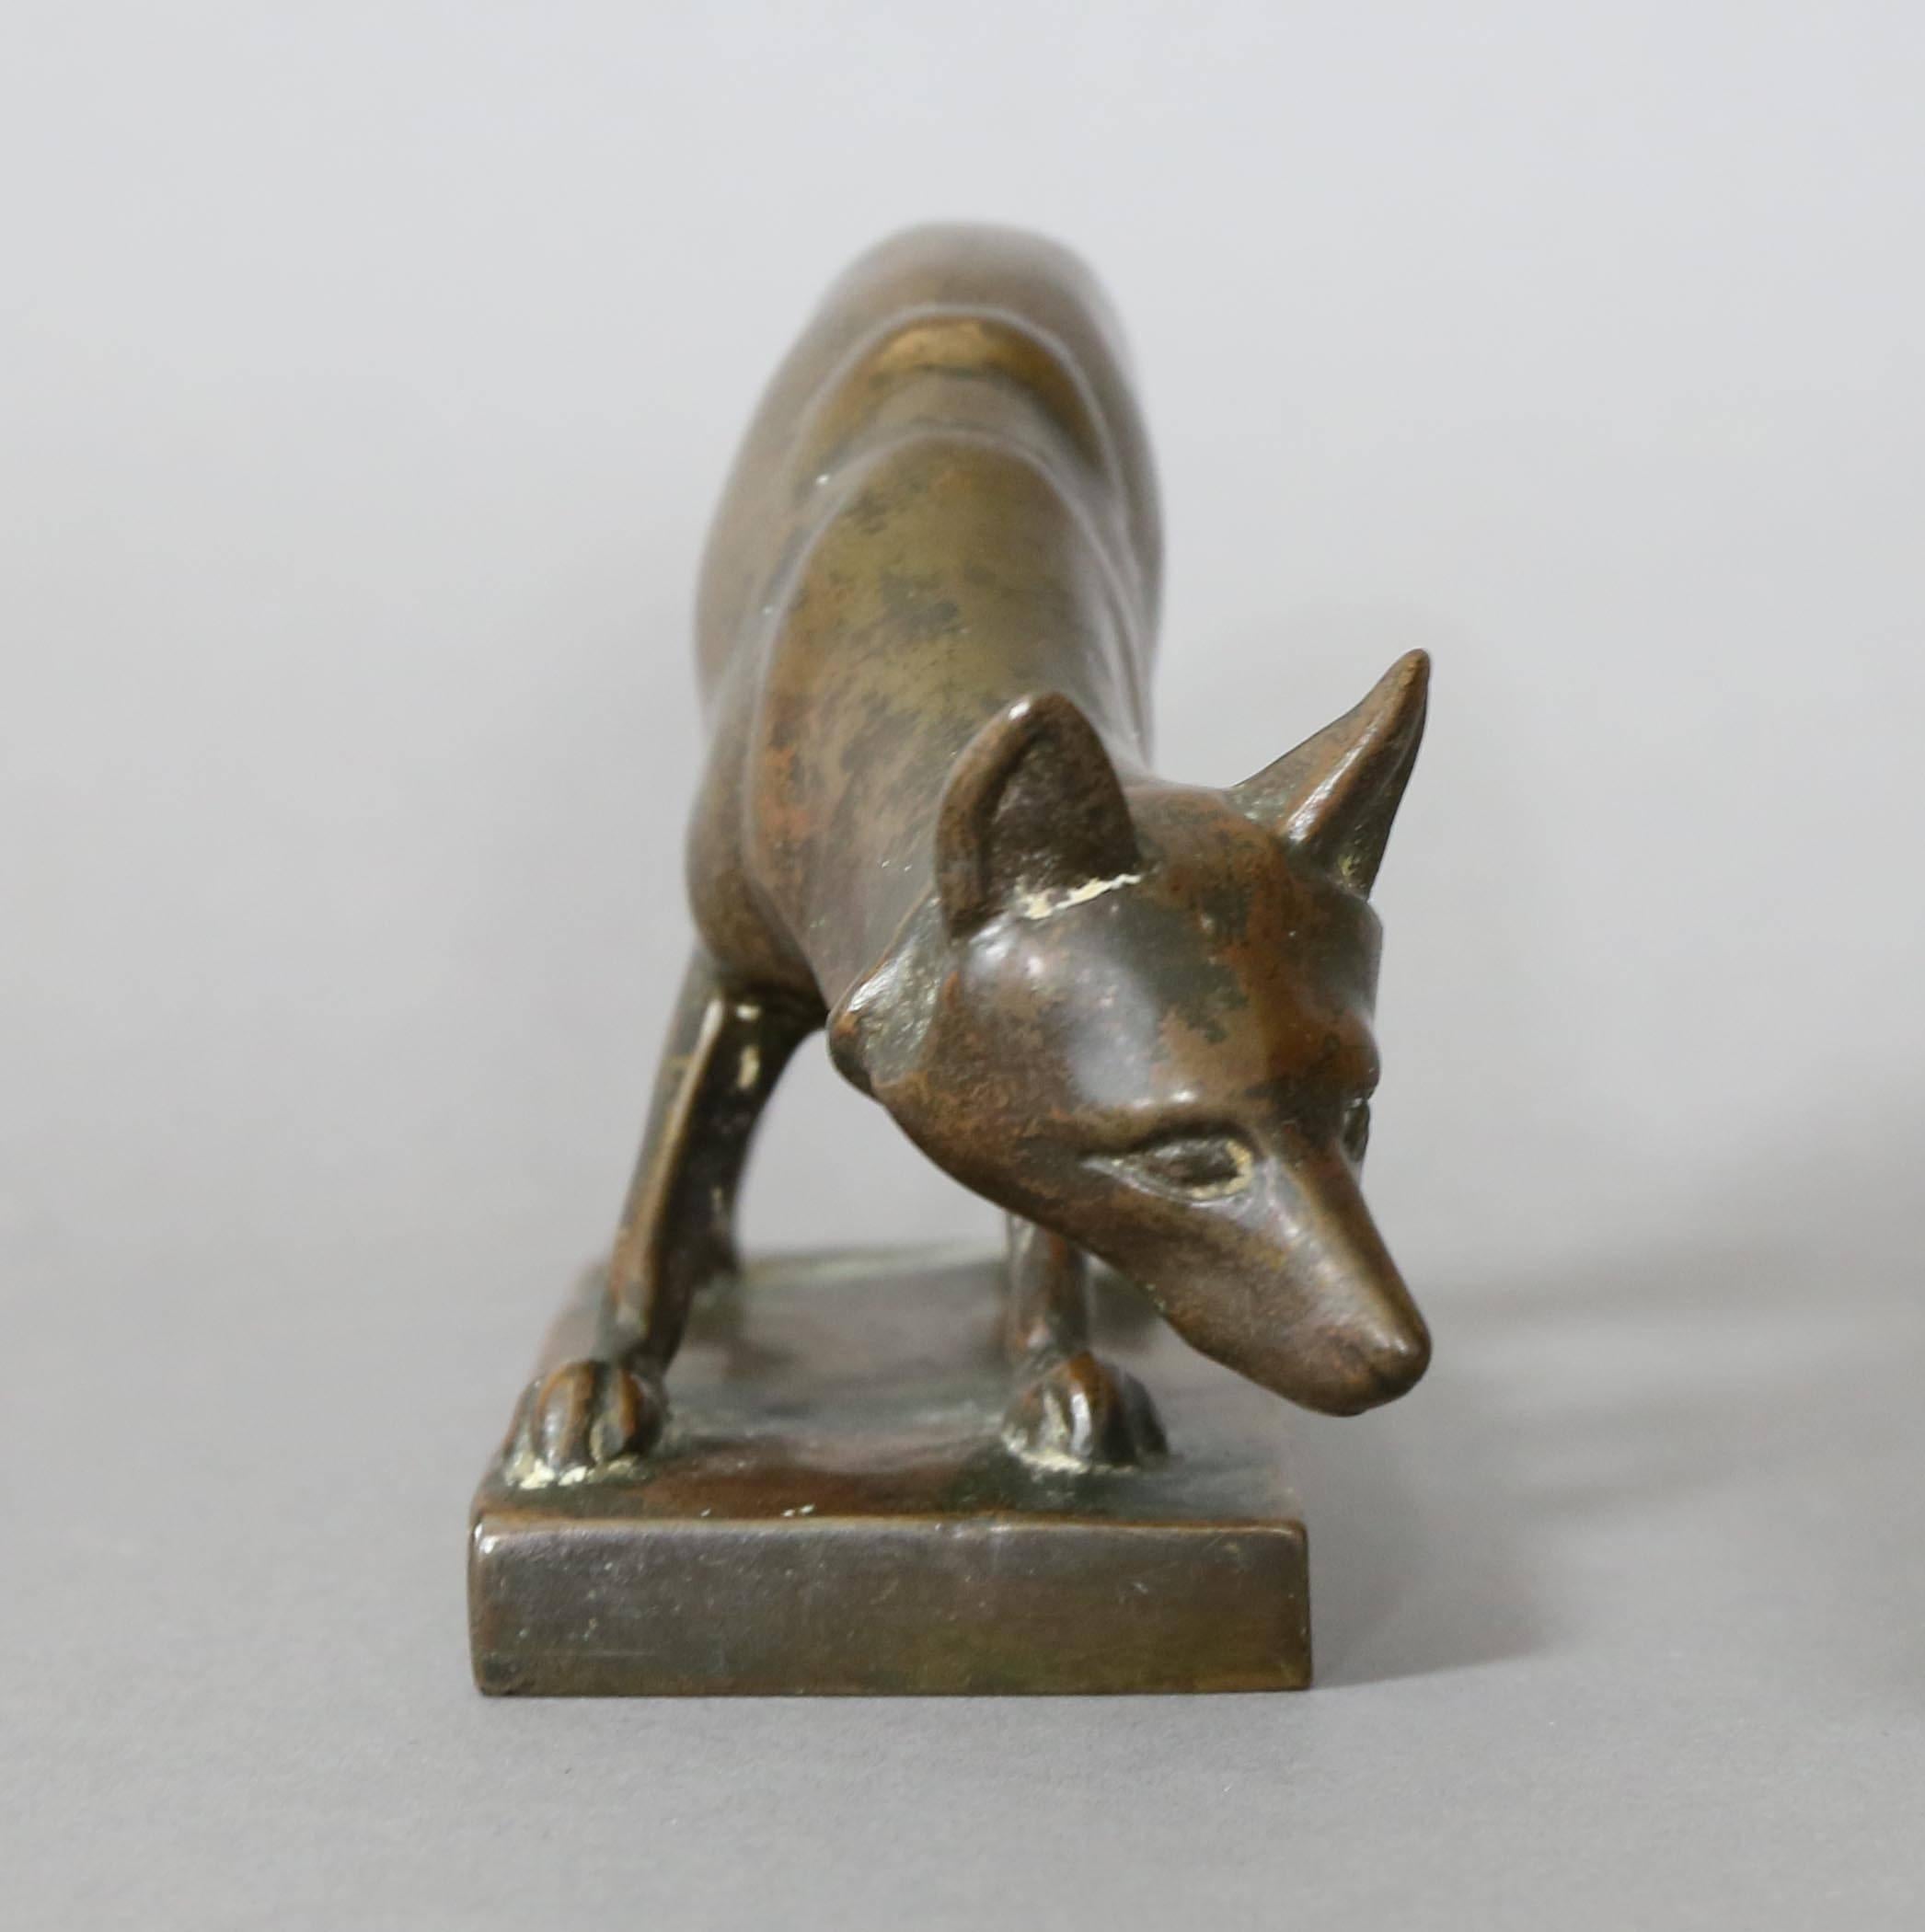 Crouching figure of a fox on a rectangular base. Signed Gorham Co, Founders, OGLM.